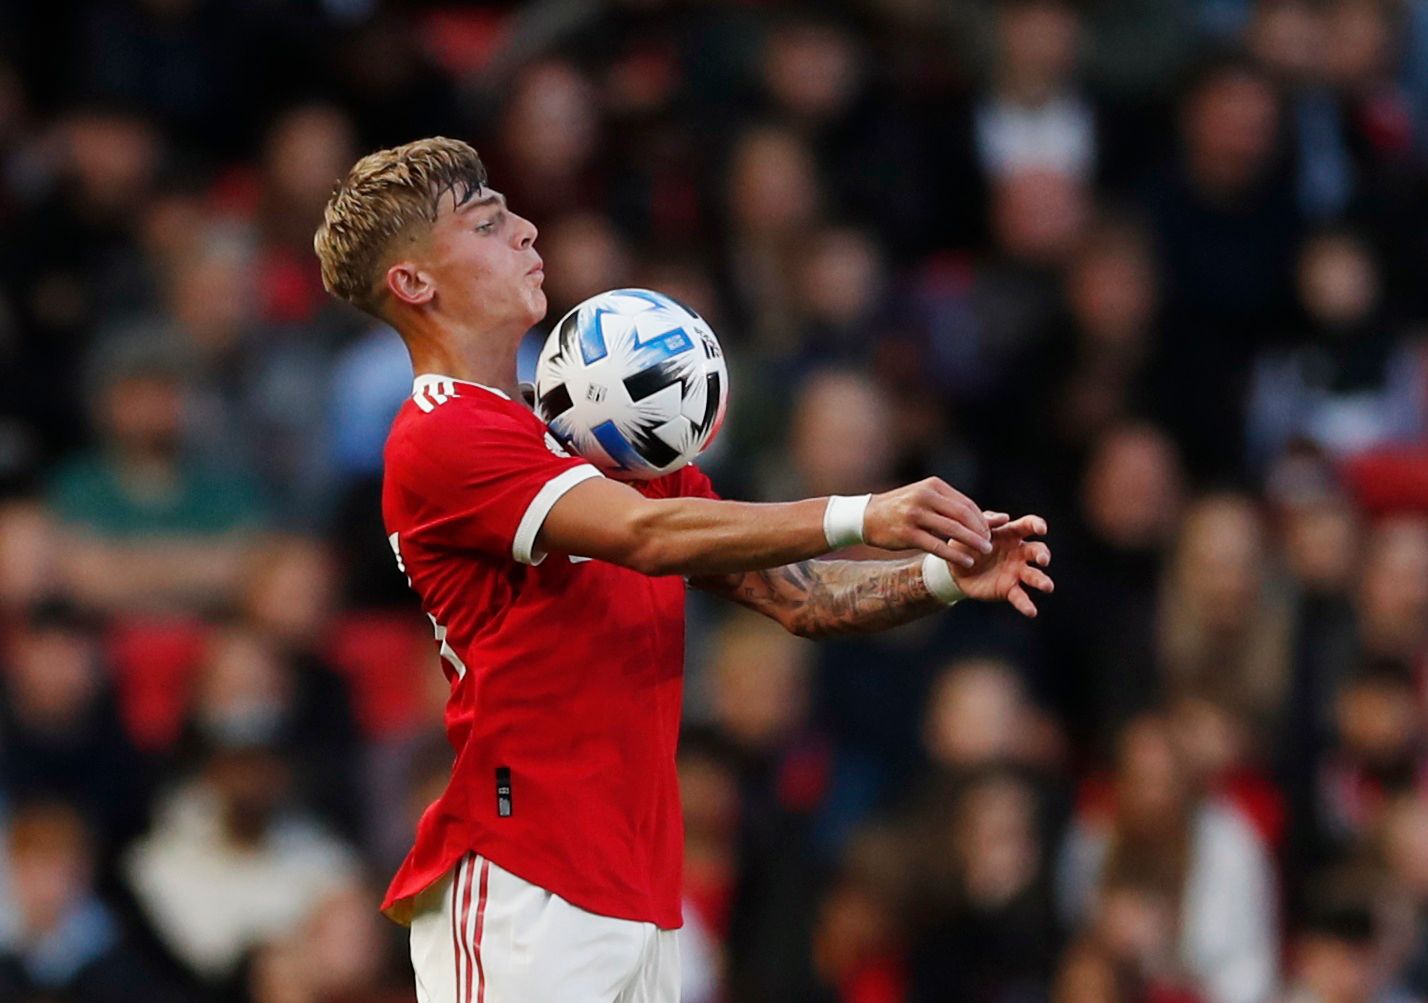 Soccer Football - Pre Season Friendly - Manchester United v Brentford - Old Trafford, Manchester, Britain - July 28, 2021  Manchester United's Brandon Williams in action Action Images via Reuters/Lee Smith